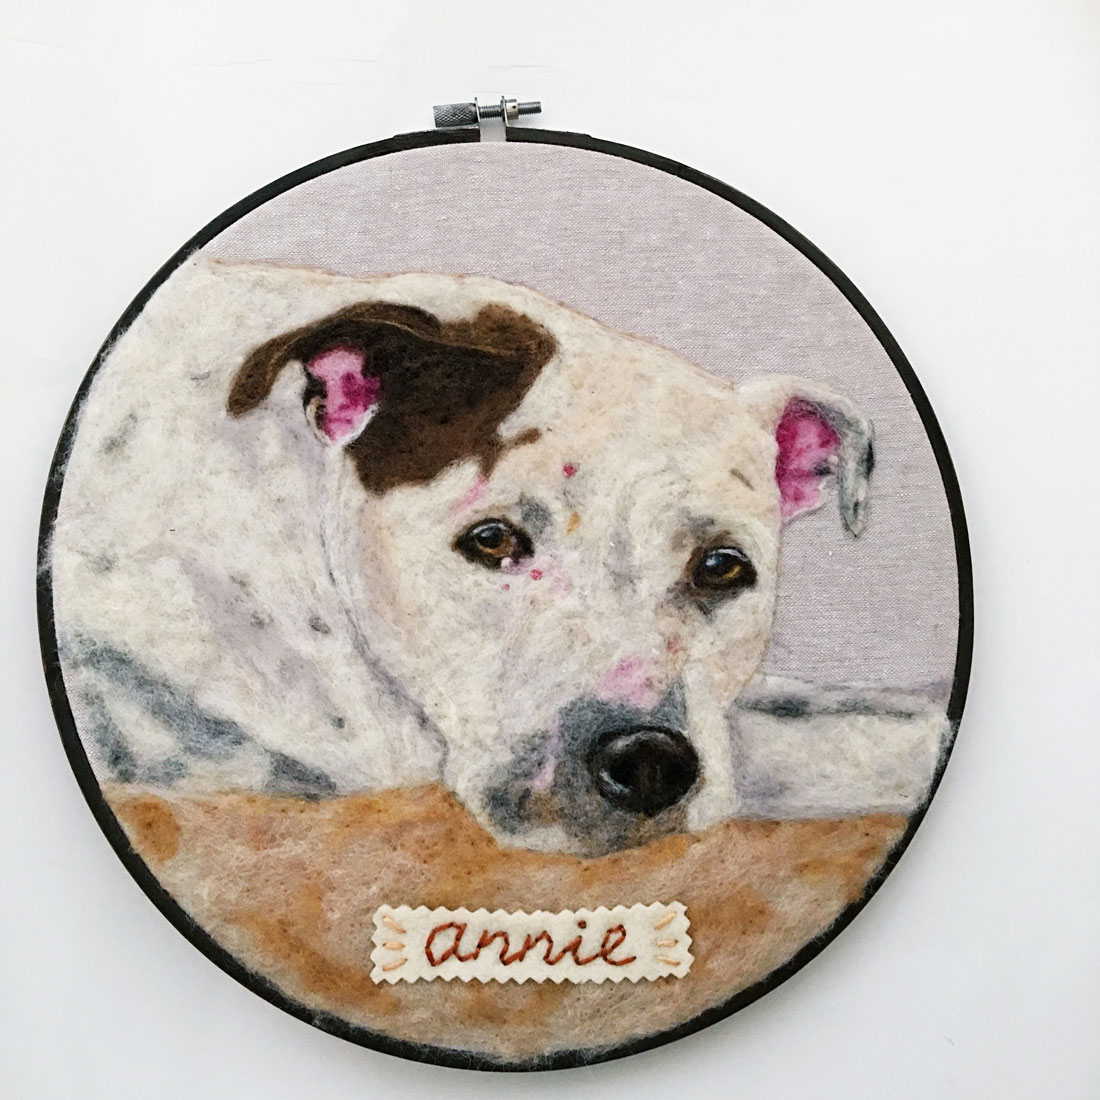 Have you ever wished for a custom portrait of your beloved pup? Inna of The Faithful Thread lovingly creates needle felted pet portraits that will help you celebrate your furry friends for years to come.